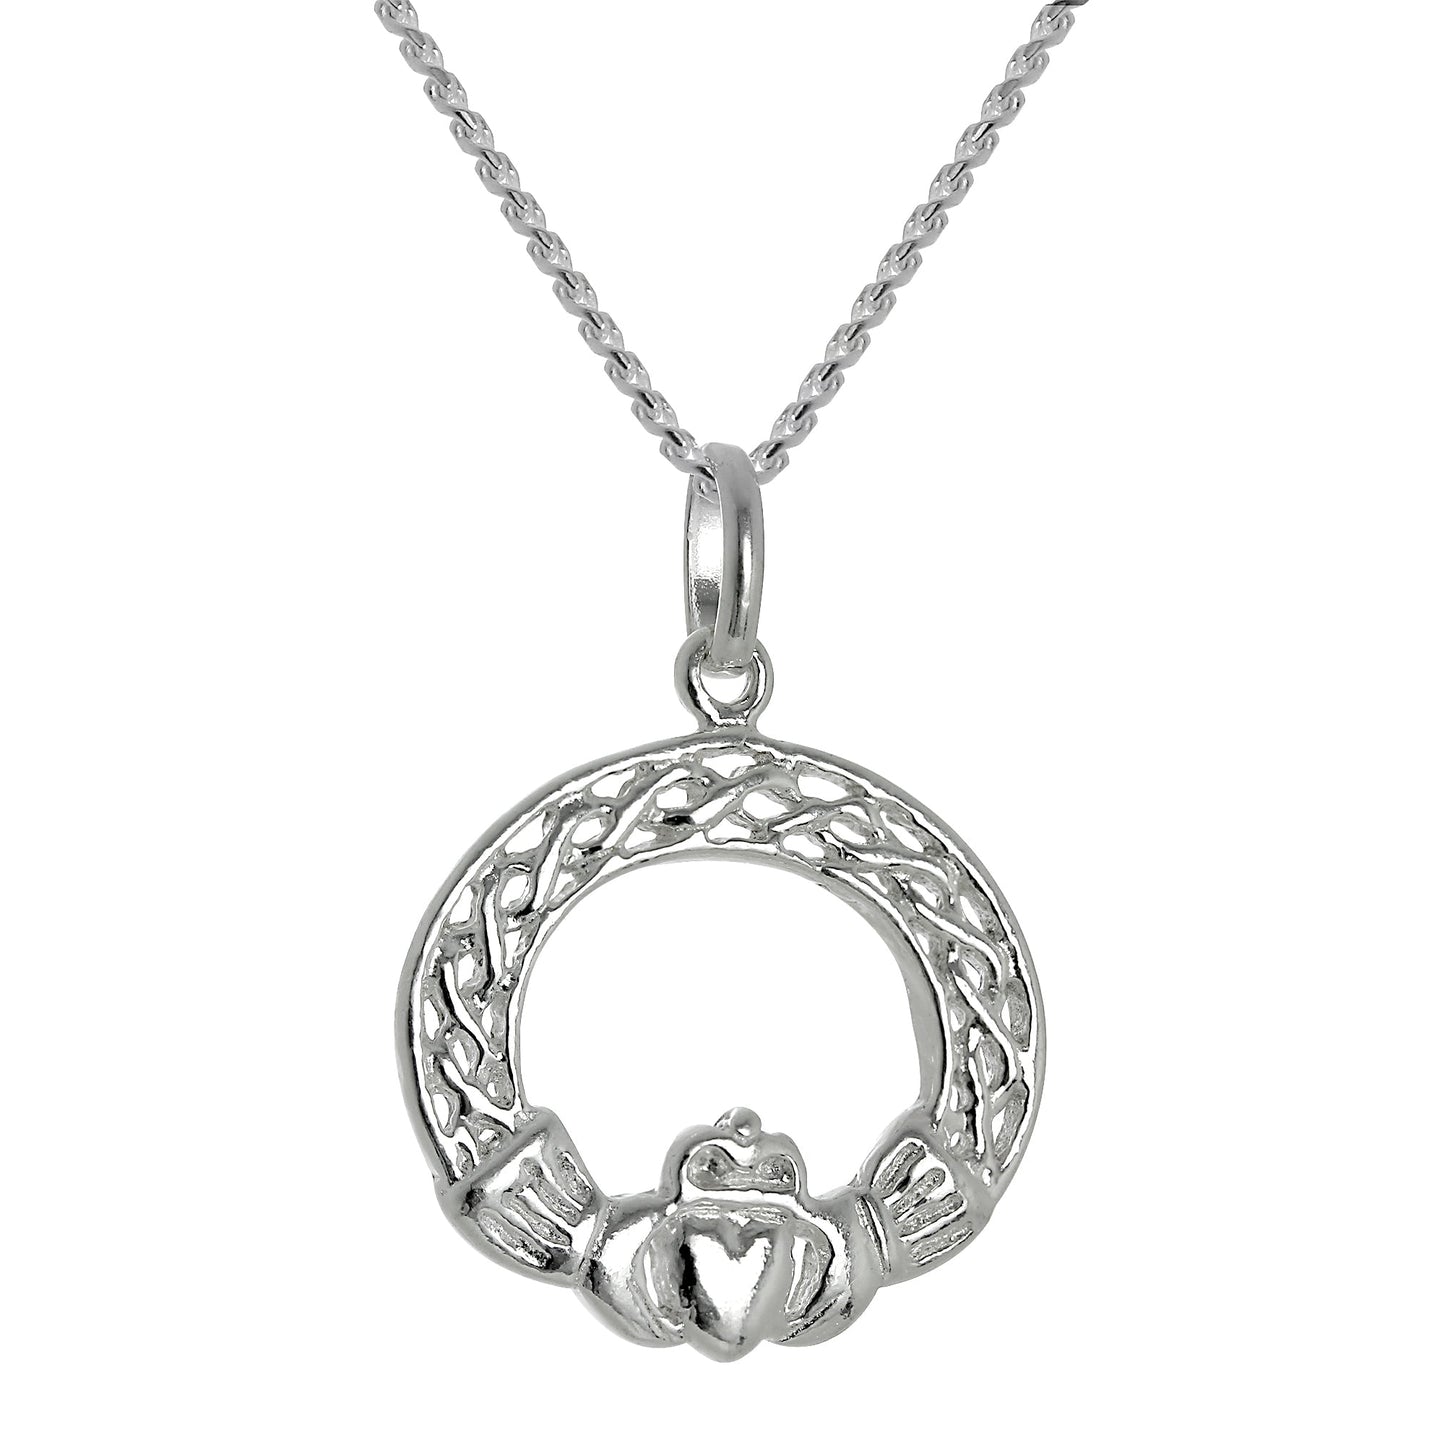 Large Sterling Silver Claddagh Pendant Necklace 16 - 22 Inches